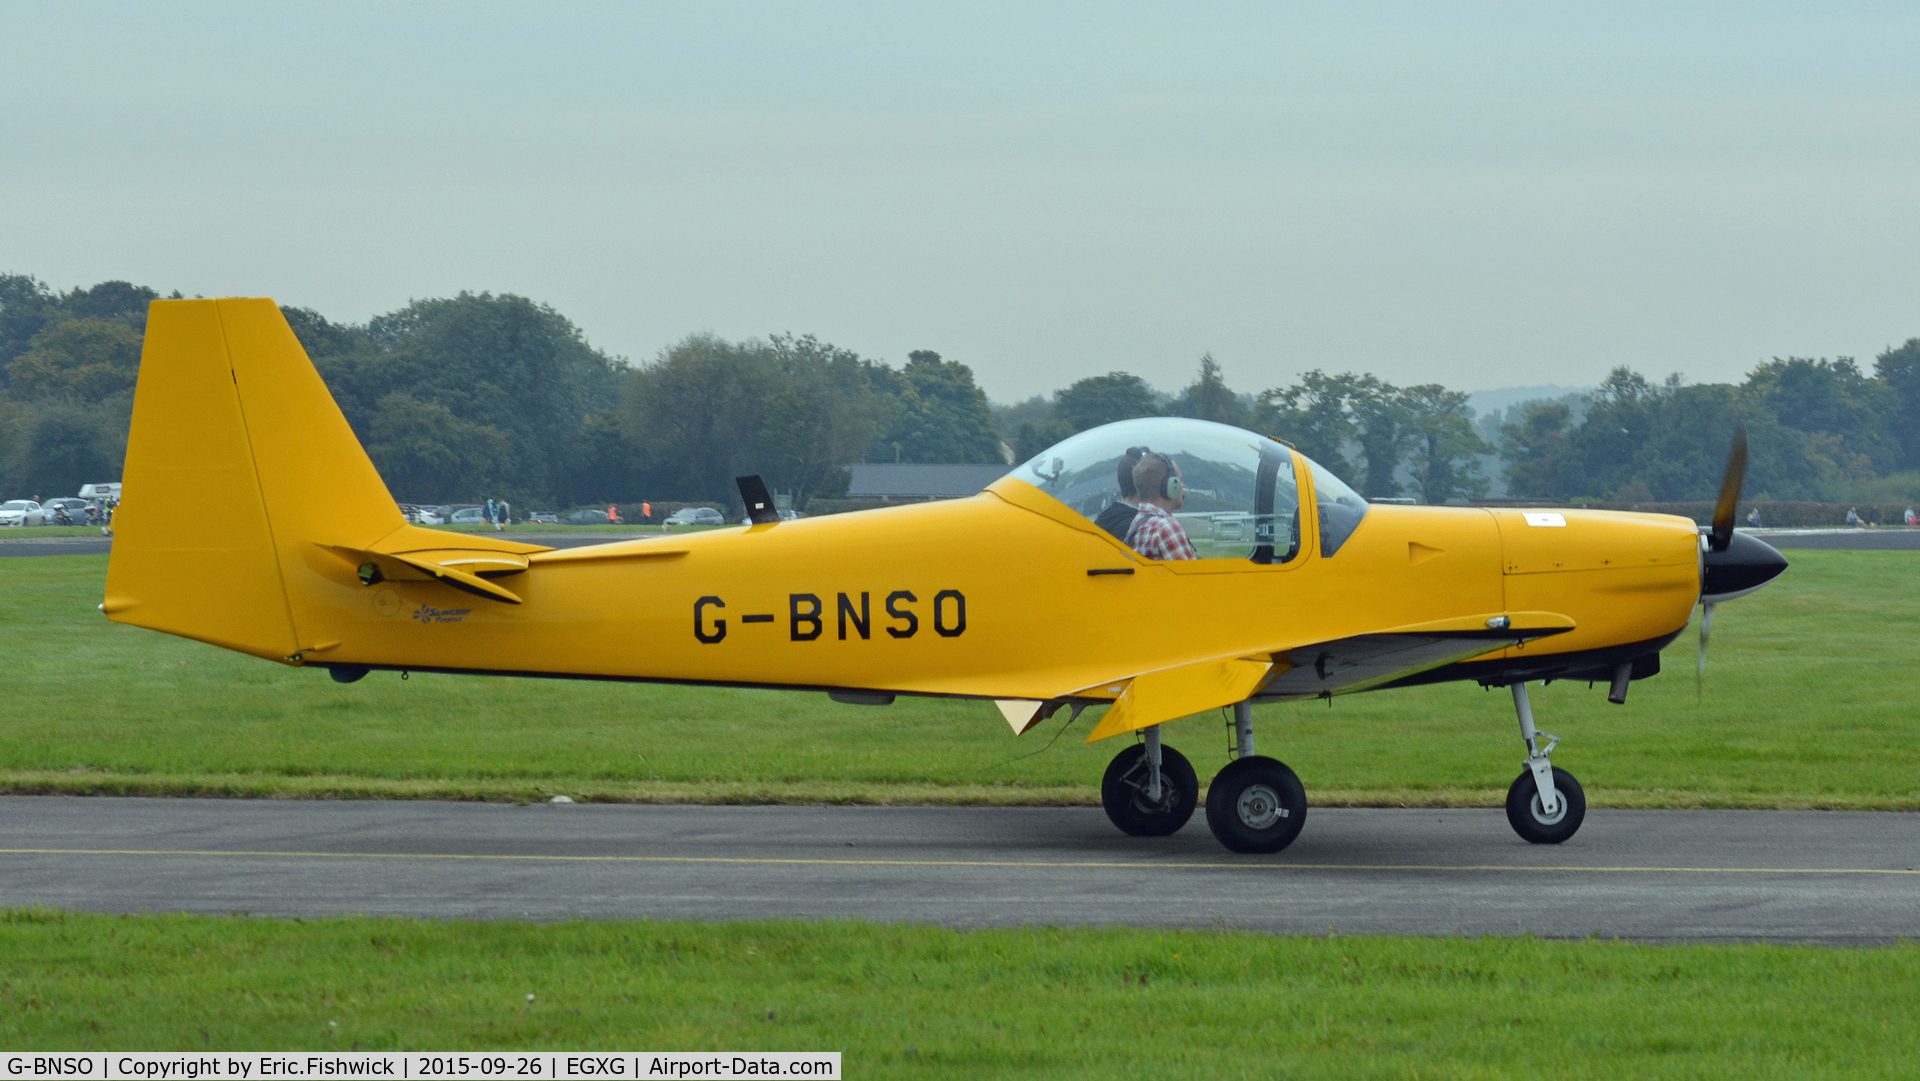 G-BNSO, 1987 Slingsby T-67M Firefly Mk2 C/N 2021, 2. G-BNSO arriving at The Yorkshire Air Show, Church Fenton, Sept. 2015.